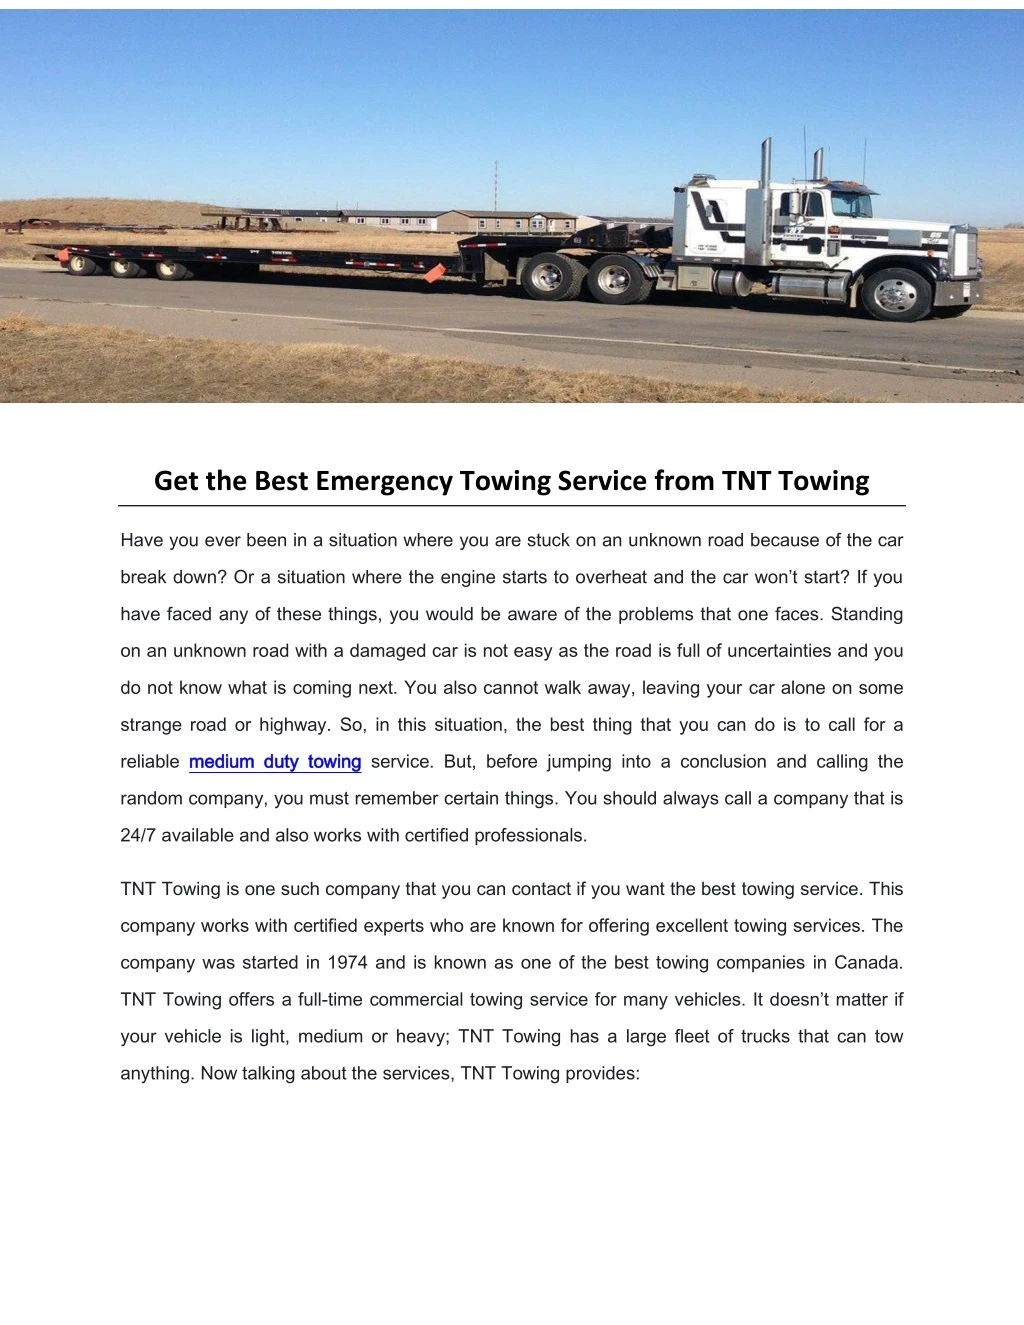 get the best emergency towing service from